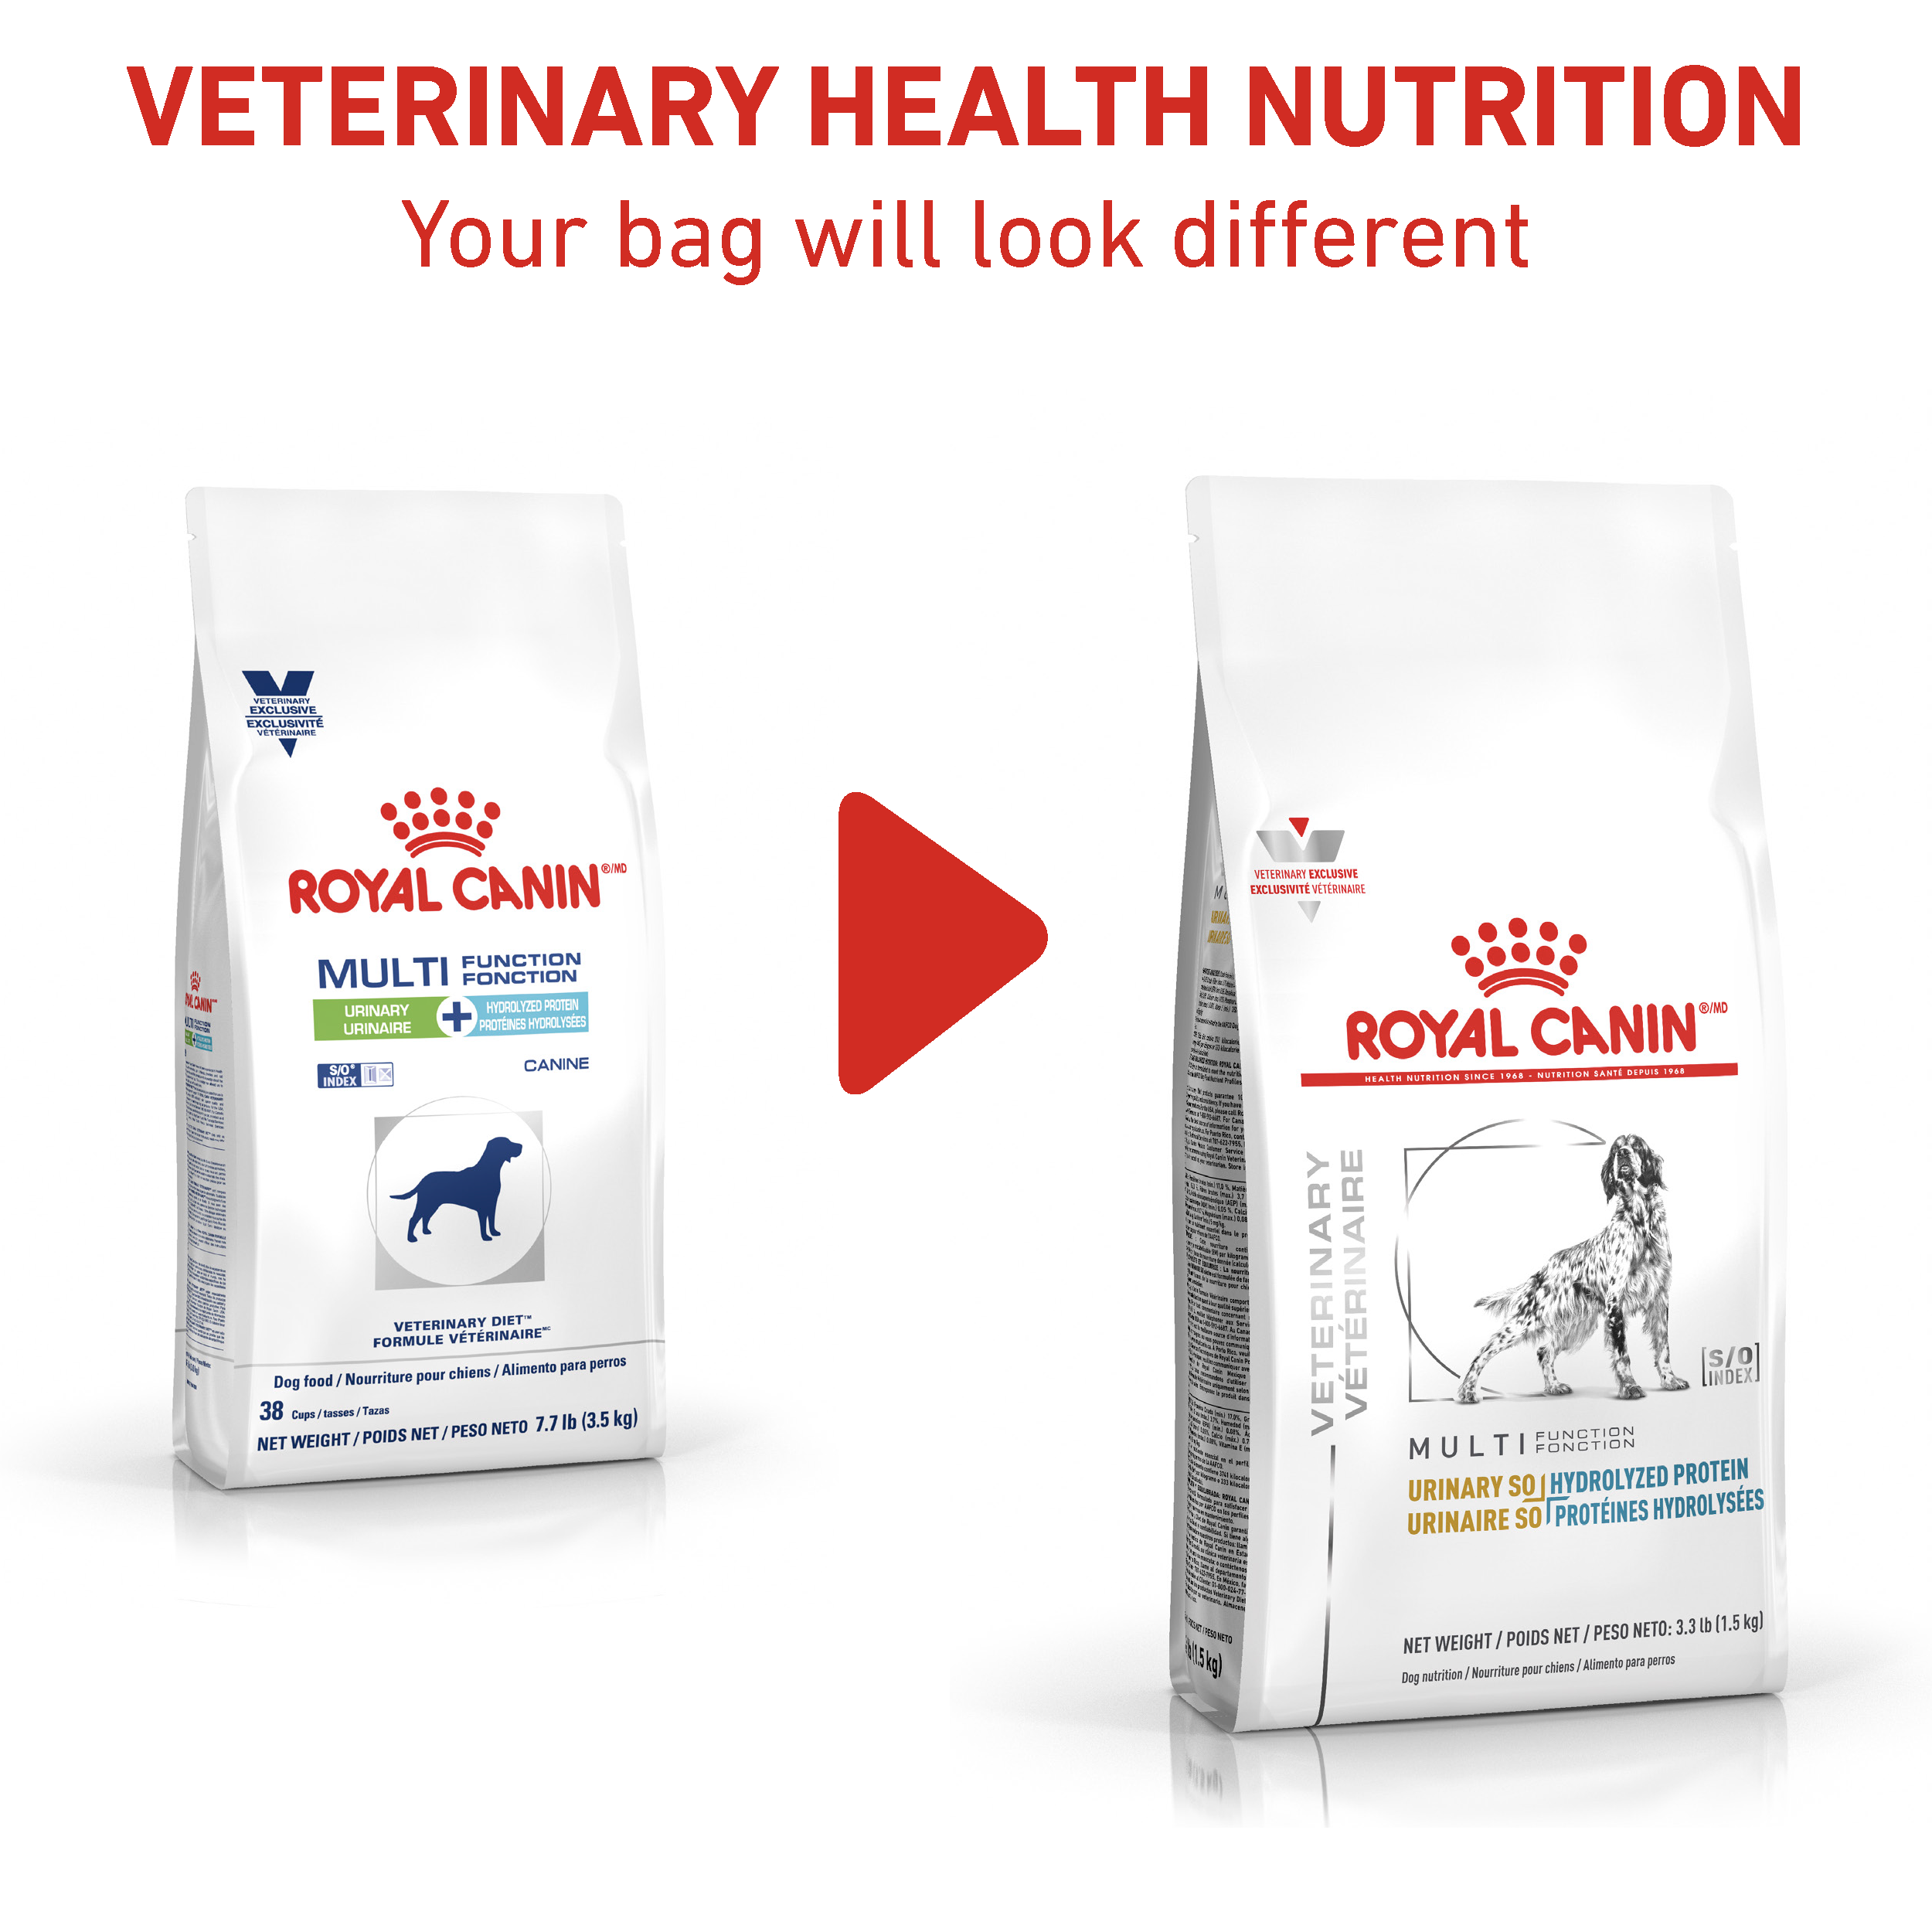 Royal Canin Multifunction Urinary Hydrolyzed Protein Canned